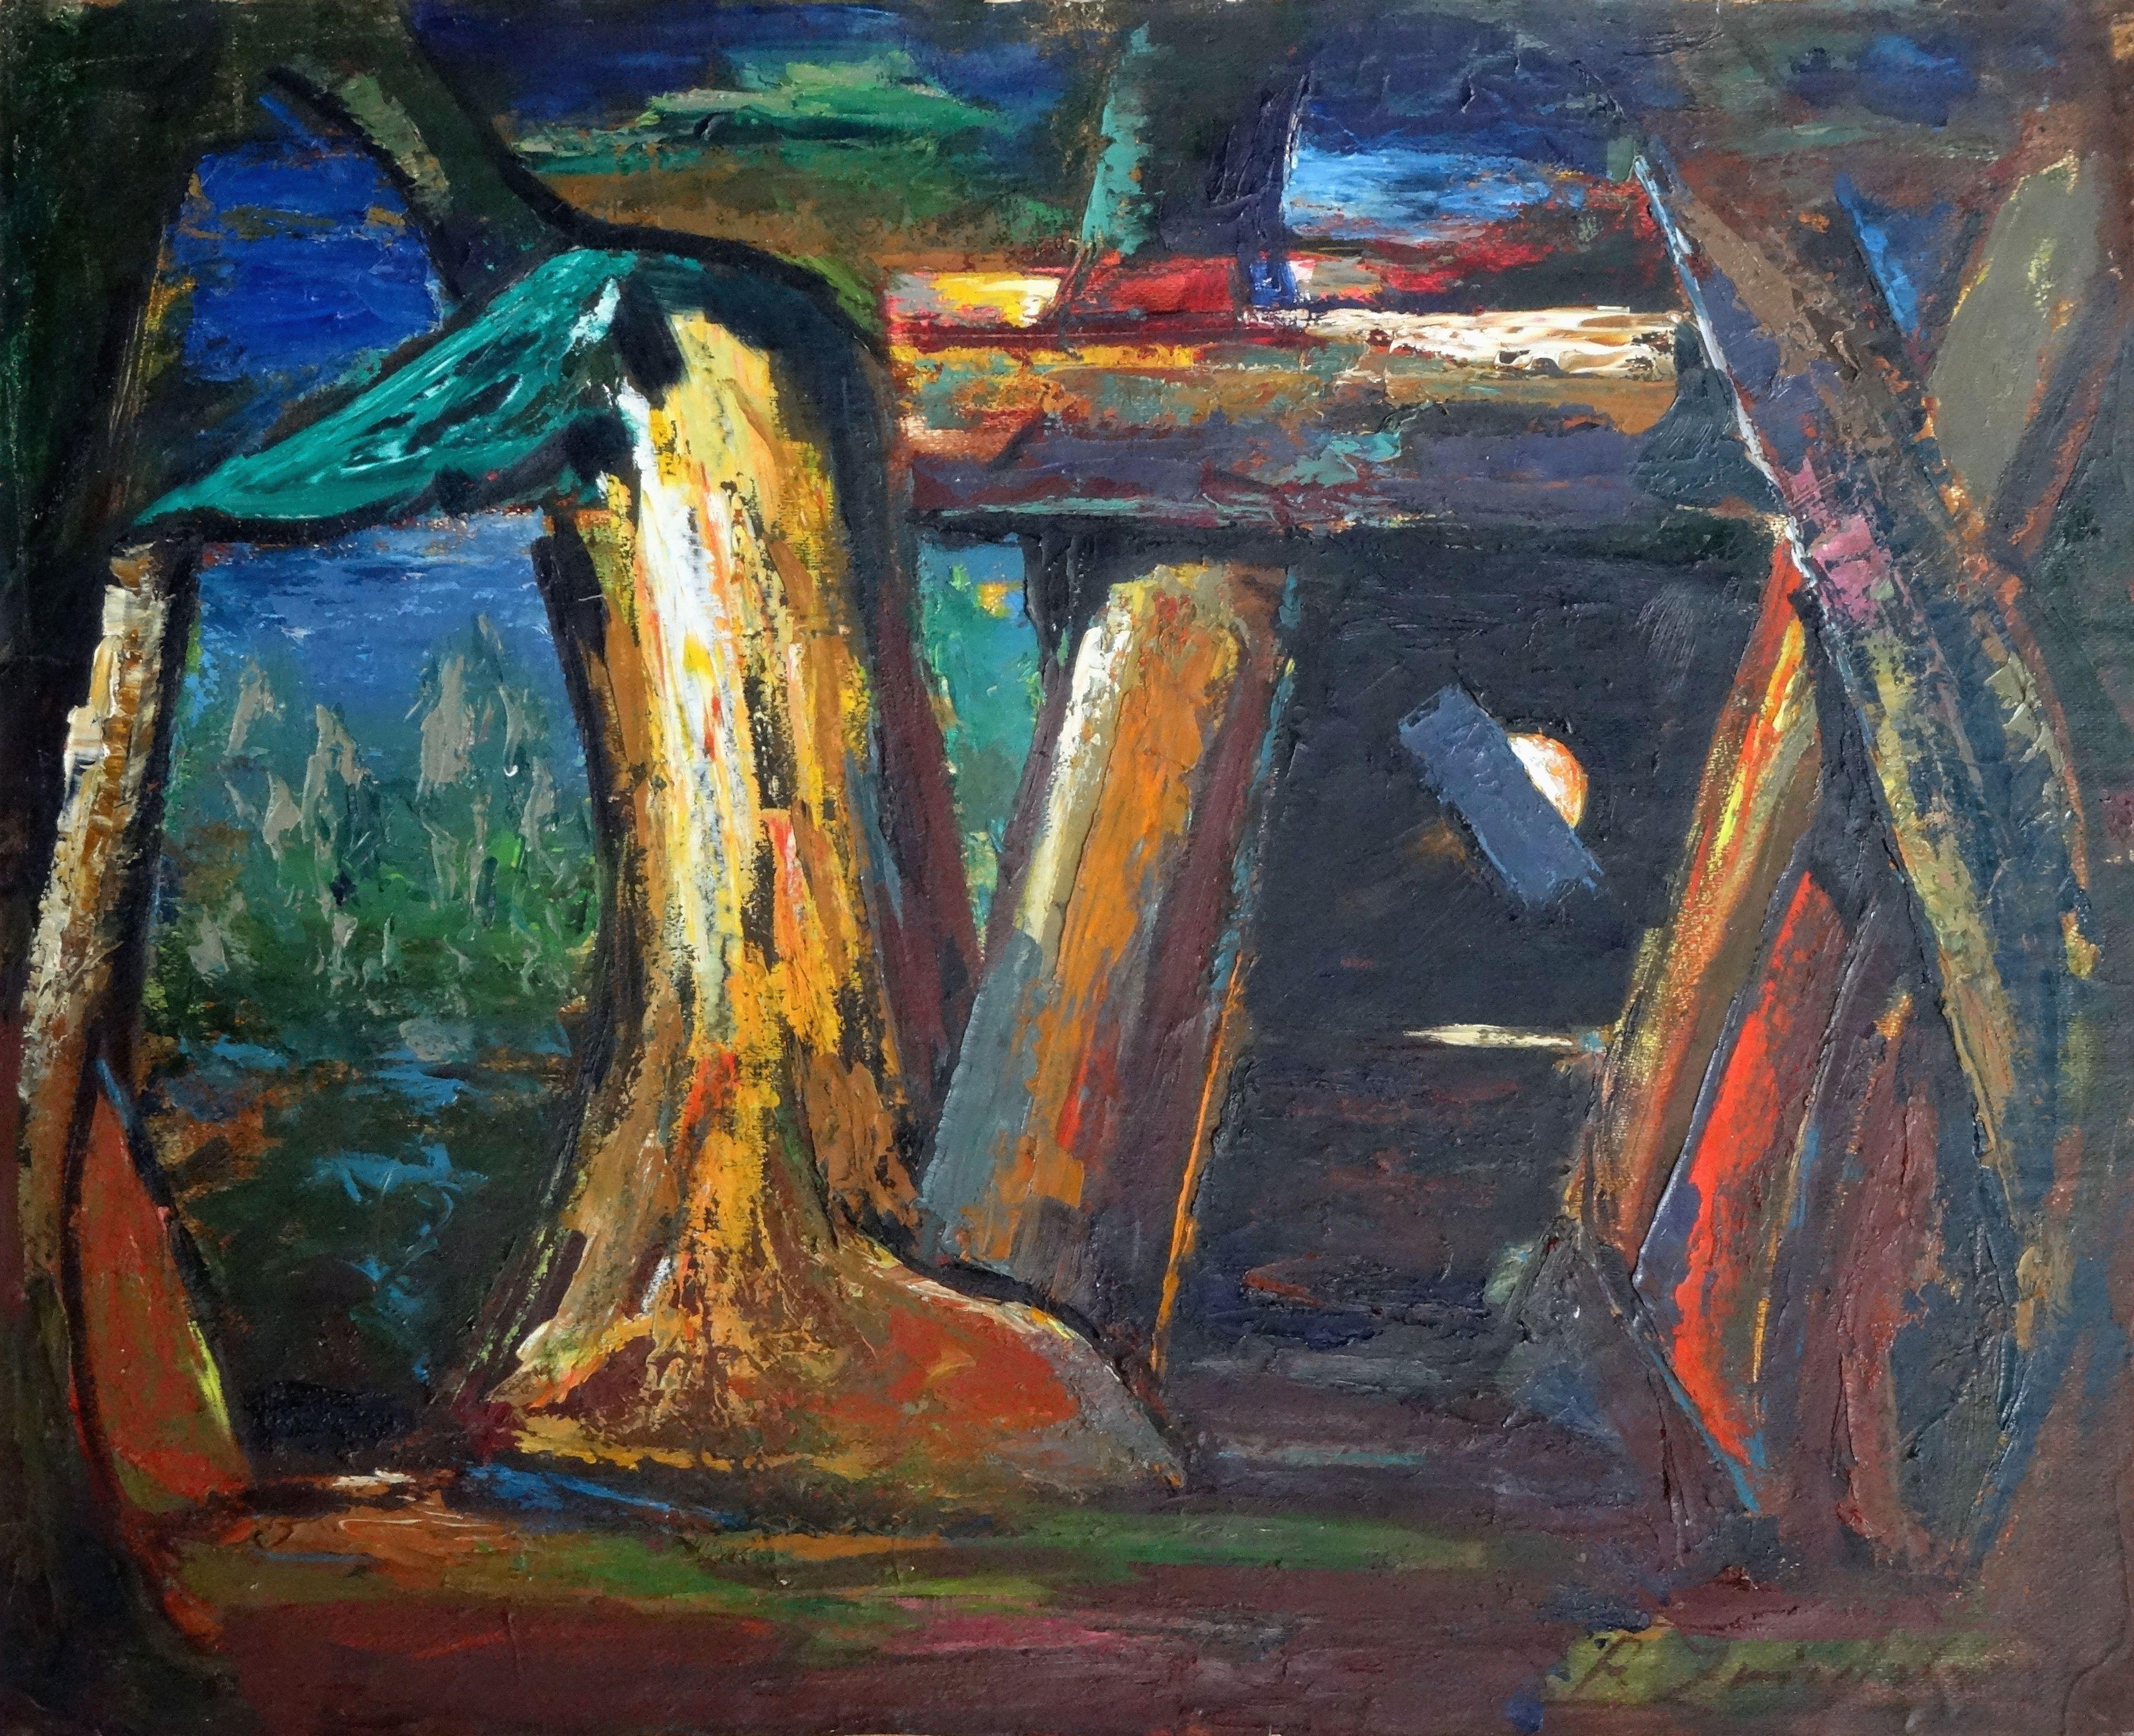 Aleksandrs Zviedris  Abstract Painting - Fire and night, 1971. Oil on cardboard, 81x100 cm